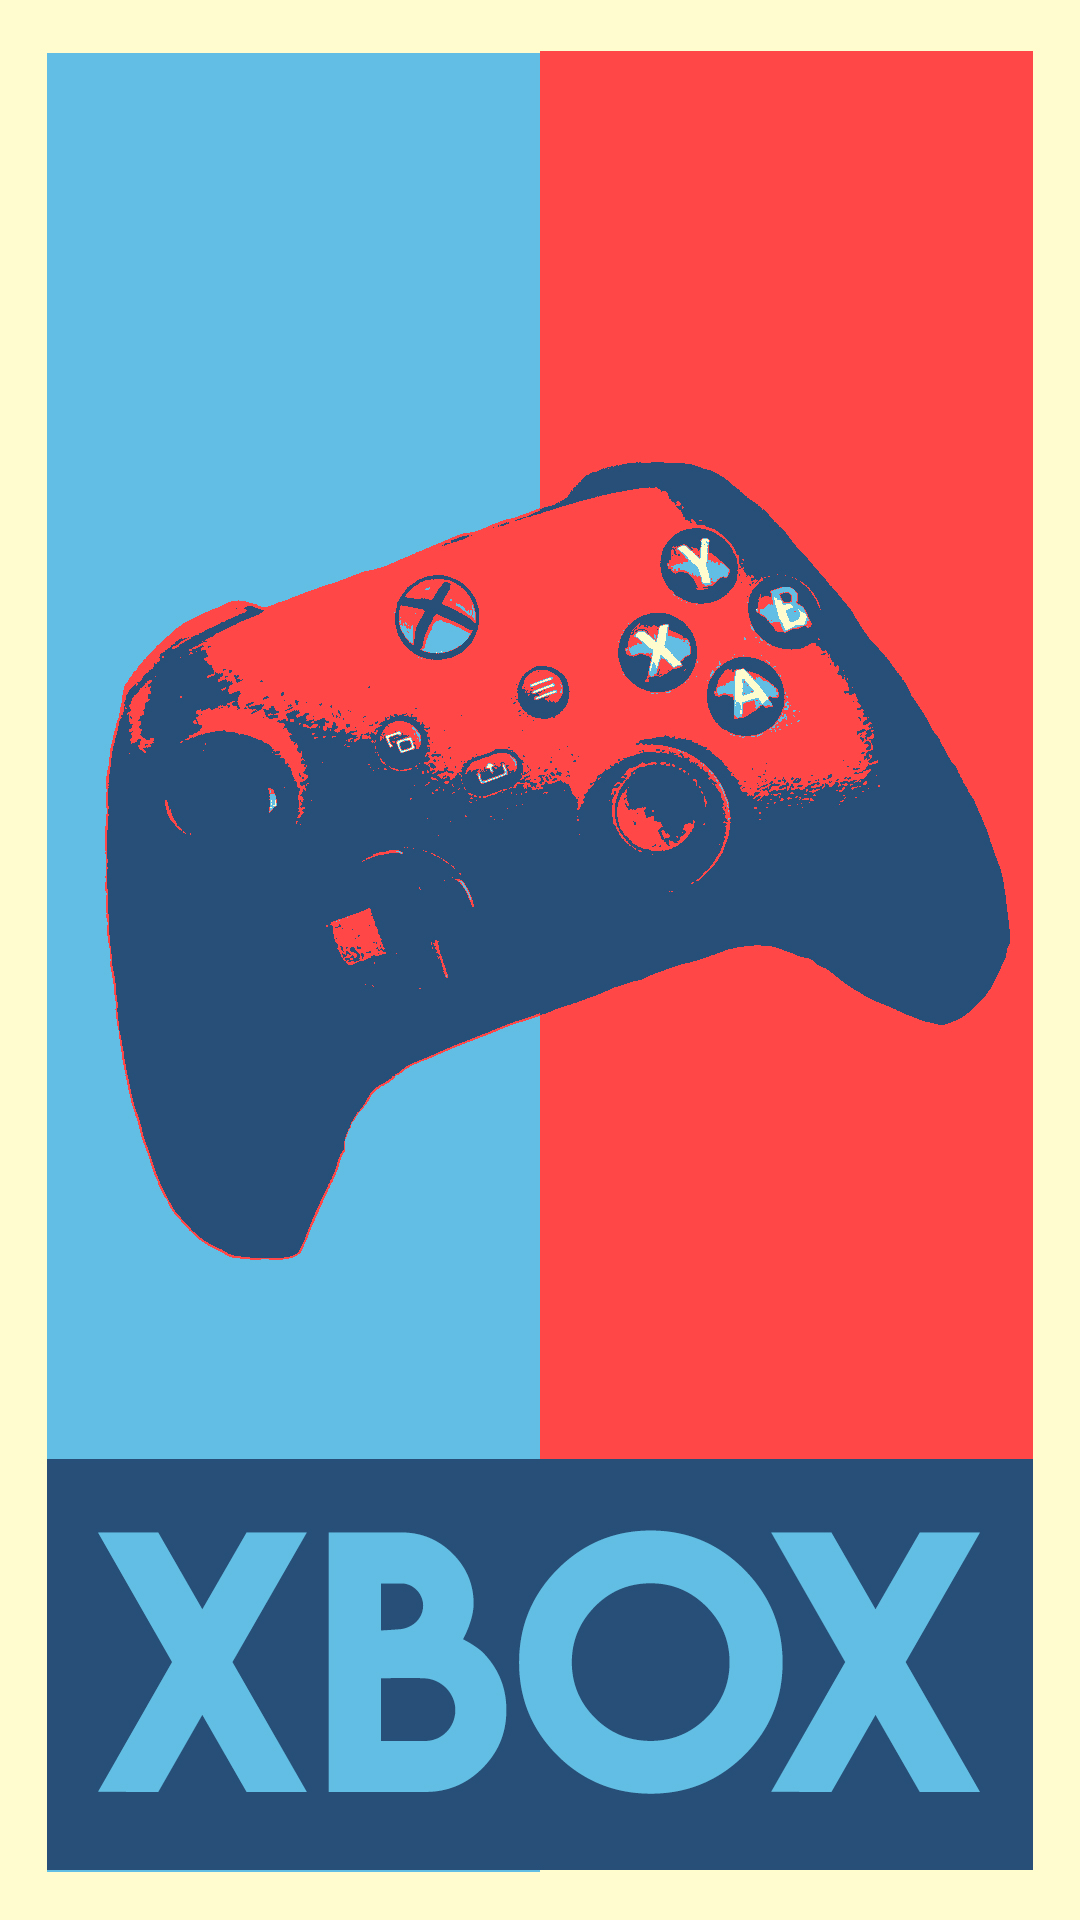 Xbox Controllers Poster Red Blue Xbox Serie X Vertical 1080x1920